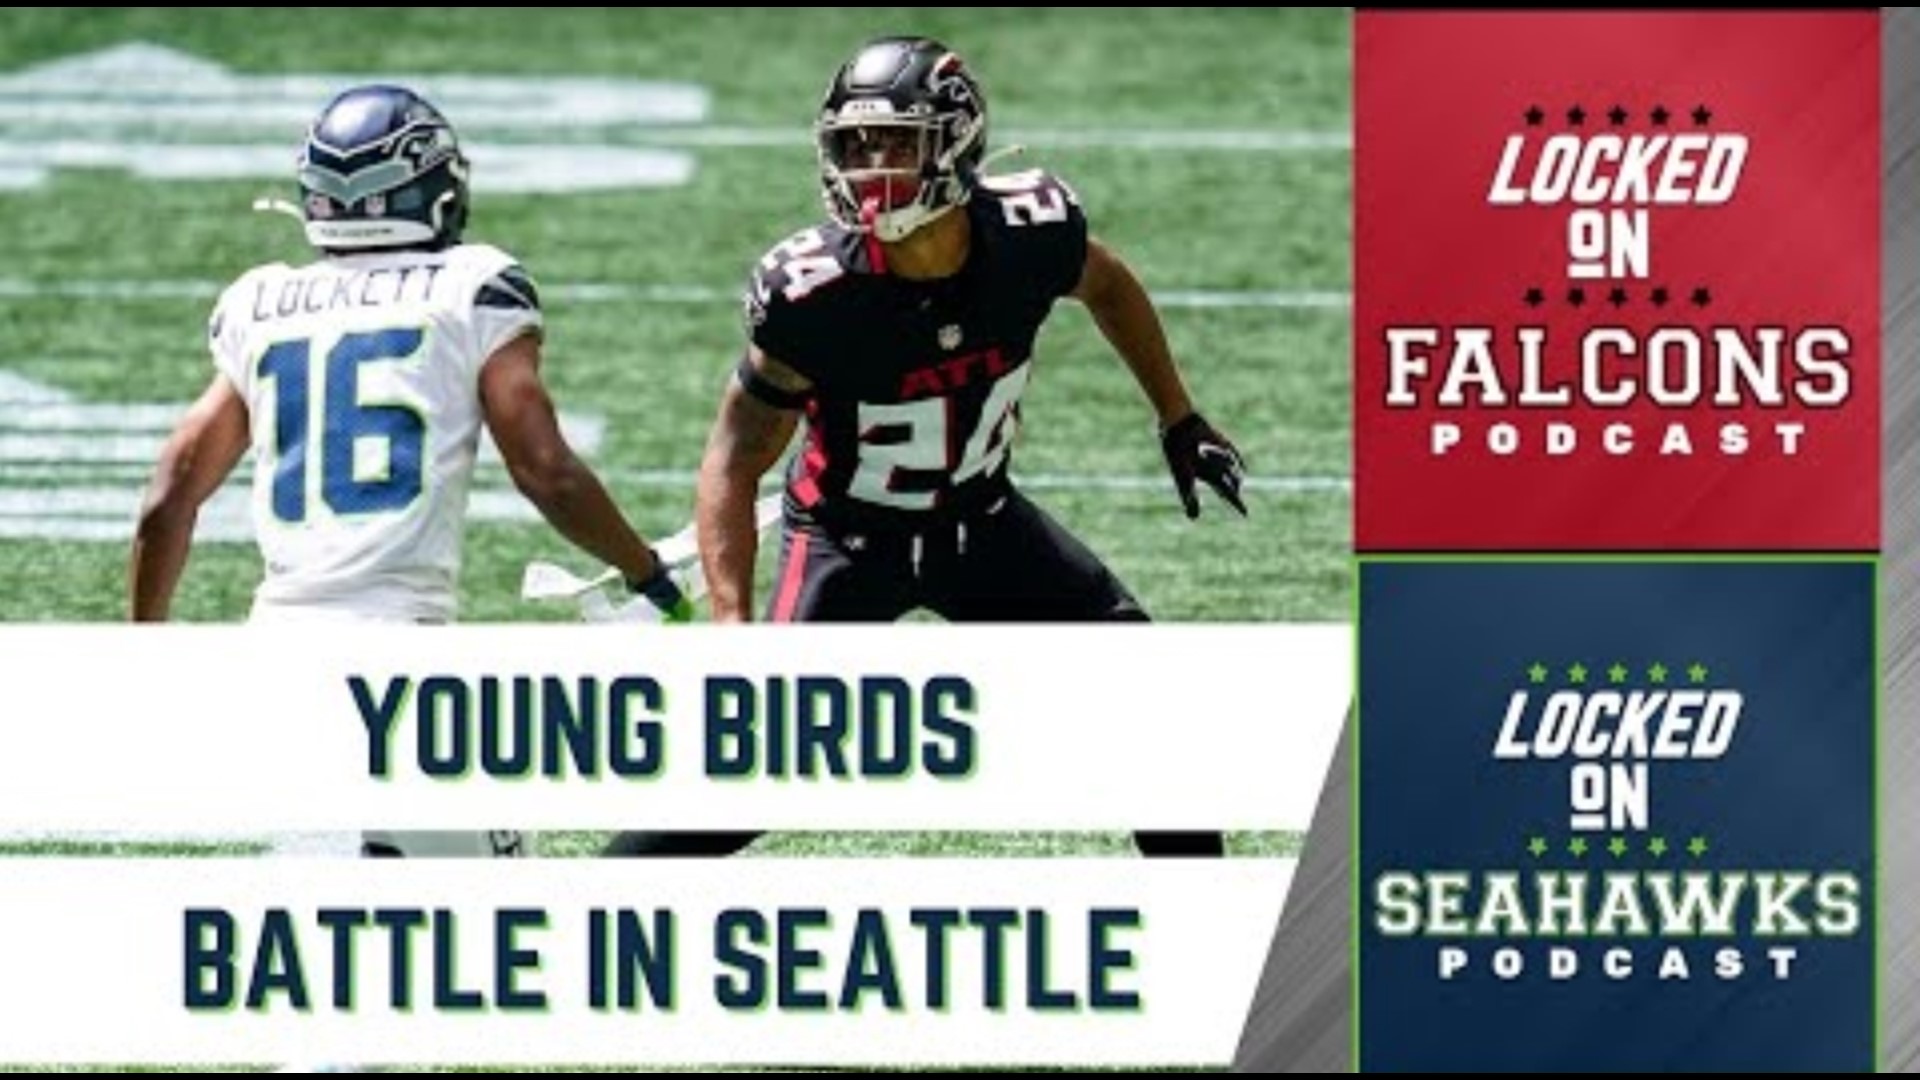 Locked On Seahawks host Corbin Smith and Locked On Falcons host Aaron Freeman take a close look at several rookies for Seattle and Atlanta.